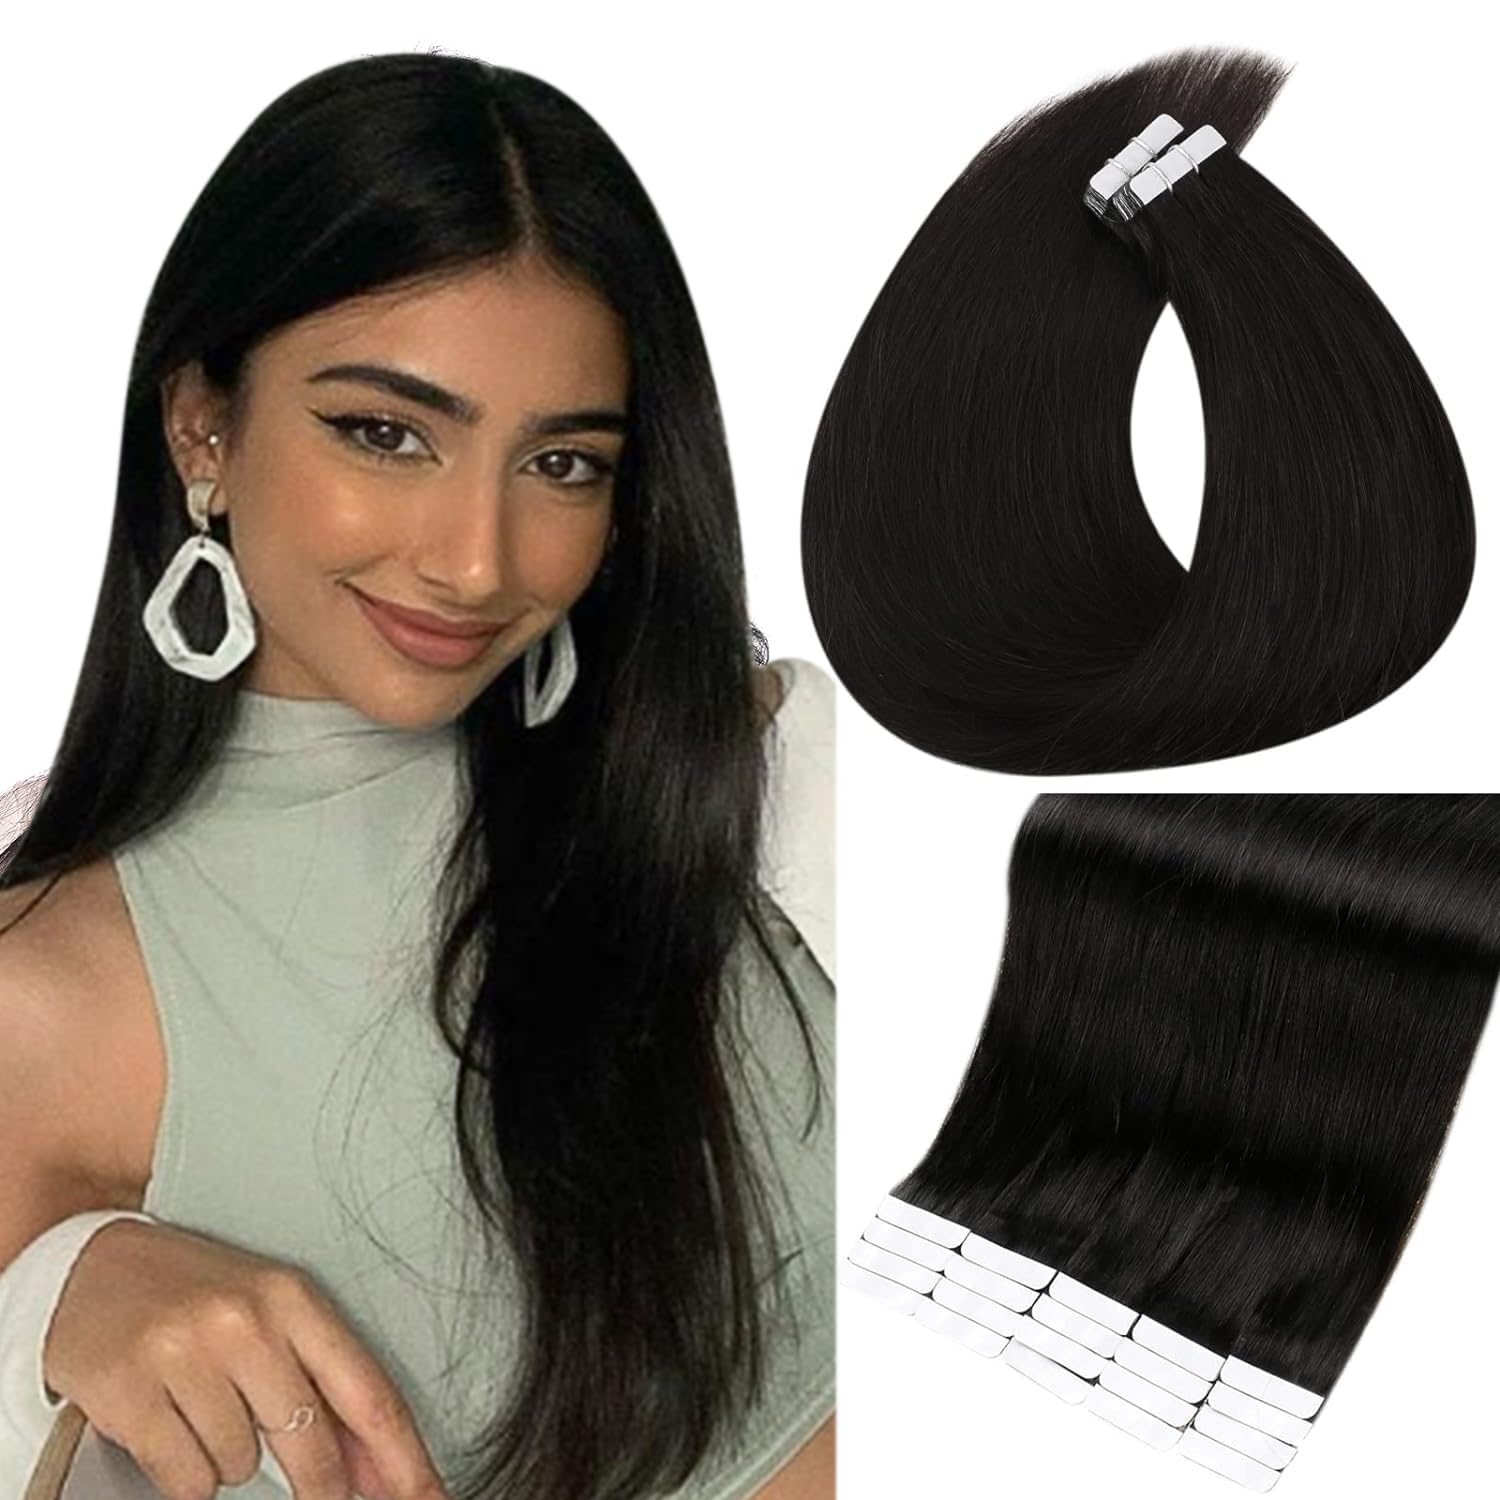 Black Tape in Hair Extensions Human Hair 18 Inch Human Hair Extensions Tape in Color 1 Jet Black Tape in Human Hair Extensions 100 Grams 40 Pcs